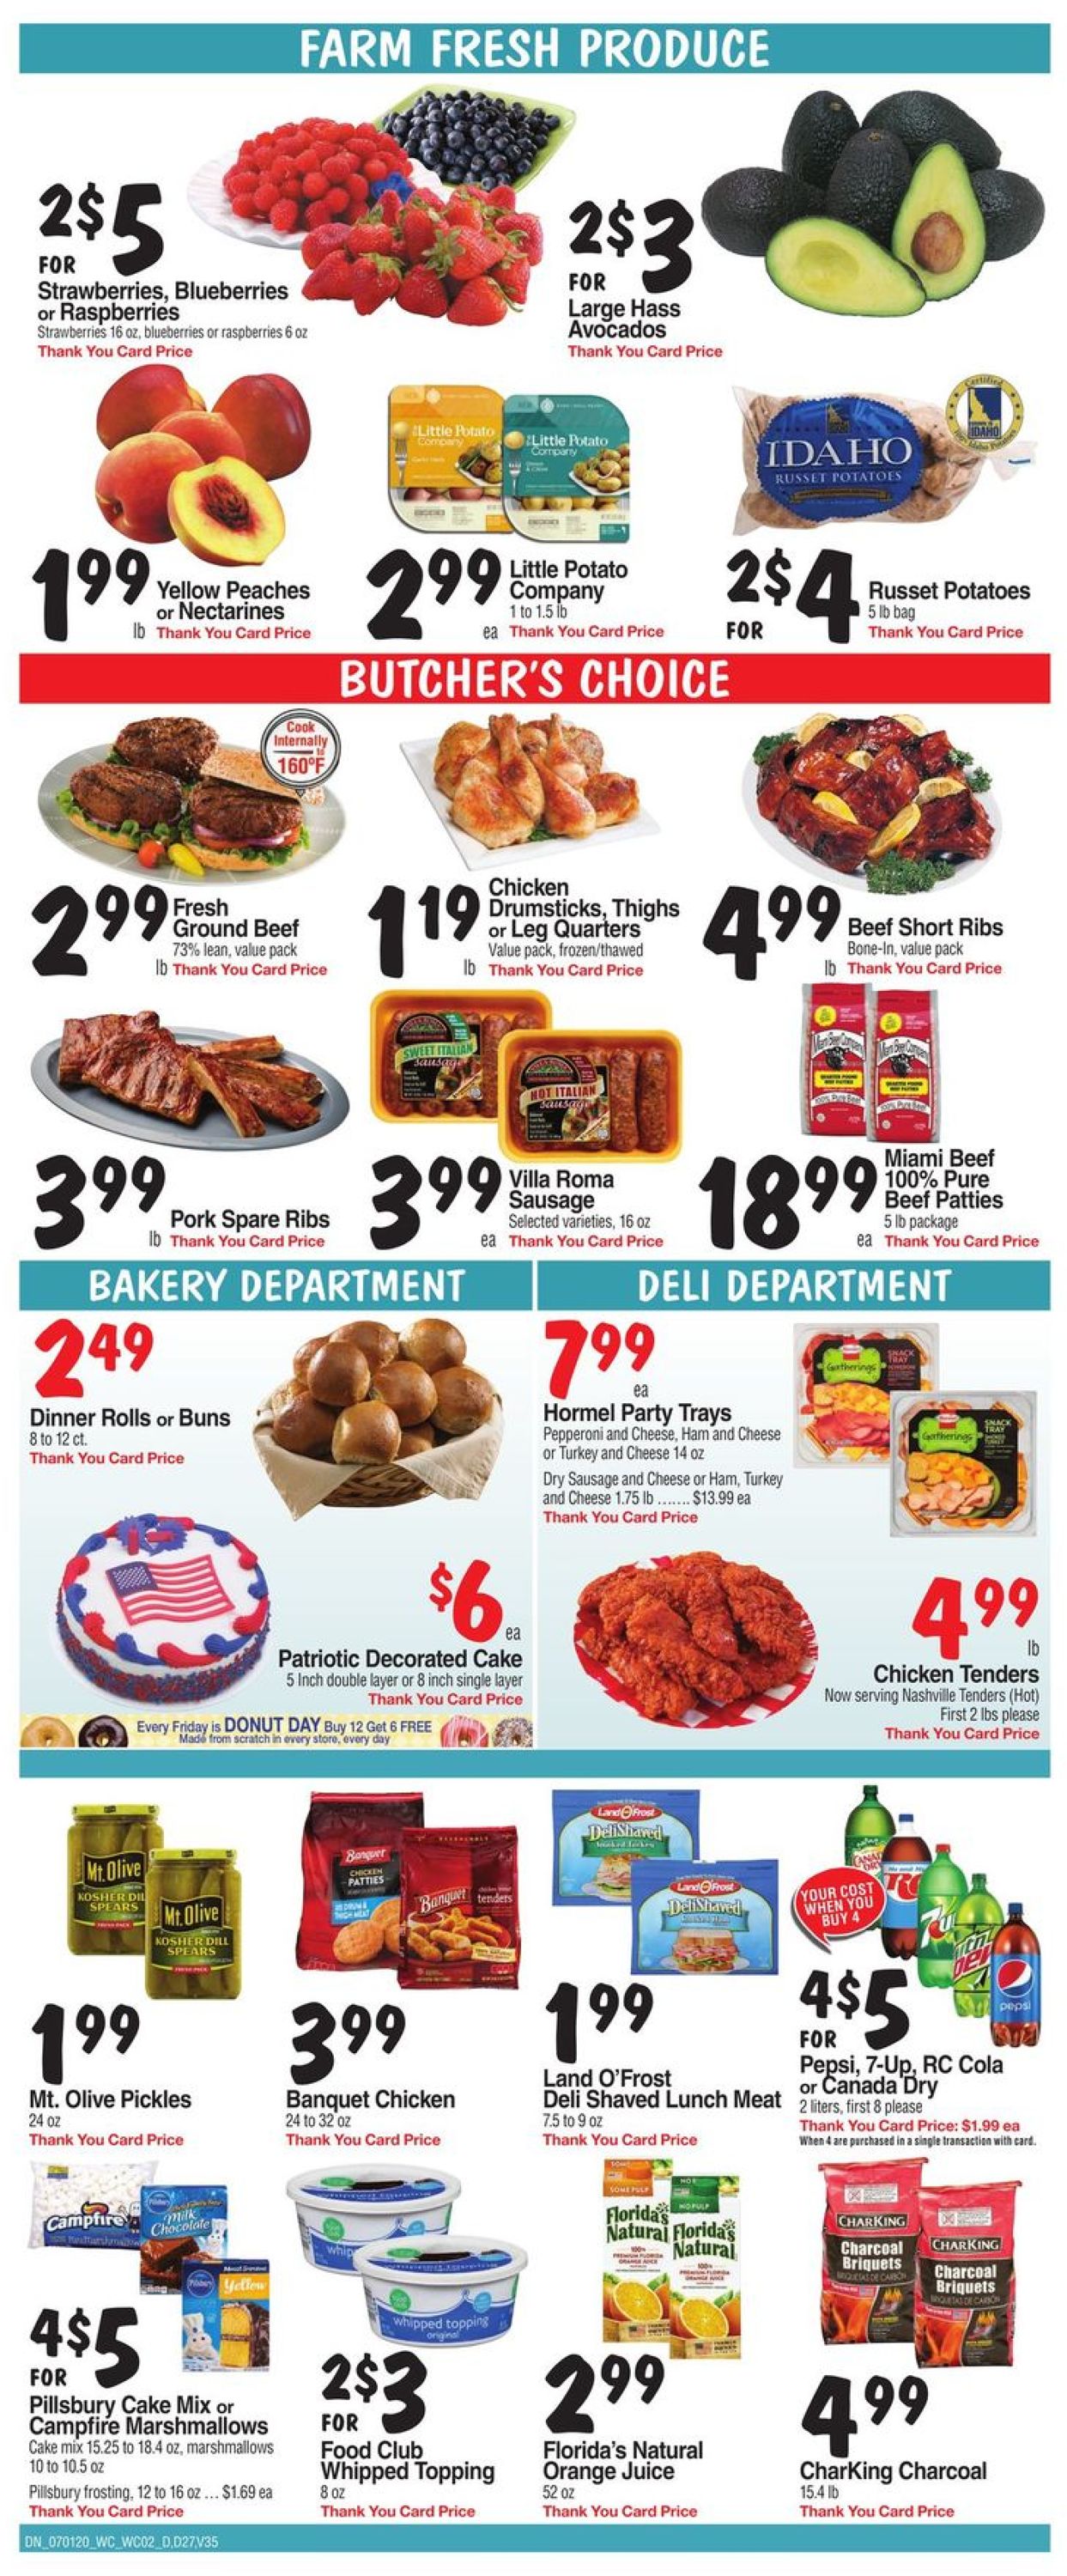 Bashas Current weekly ad 07/01 - 07/07/2020 [2] - frequent-ads.com